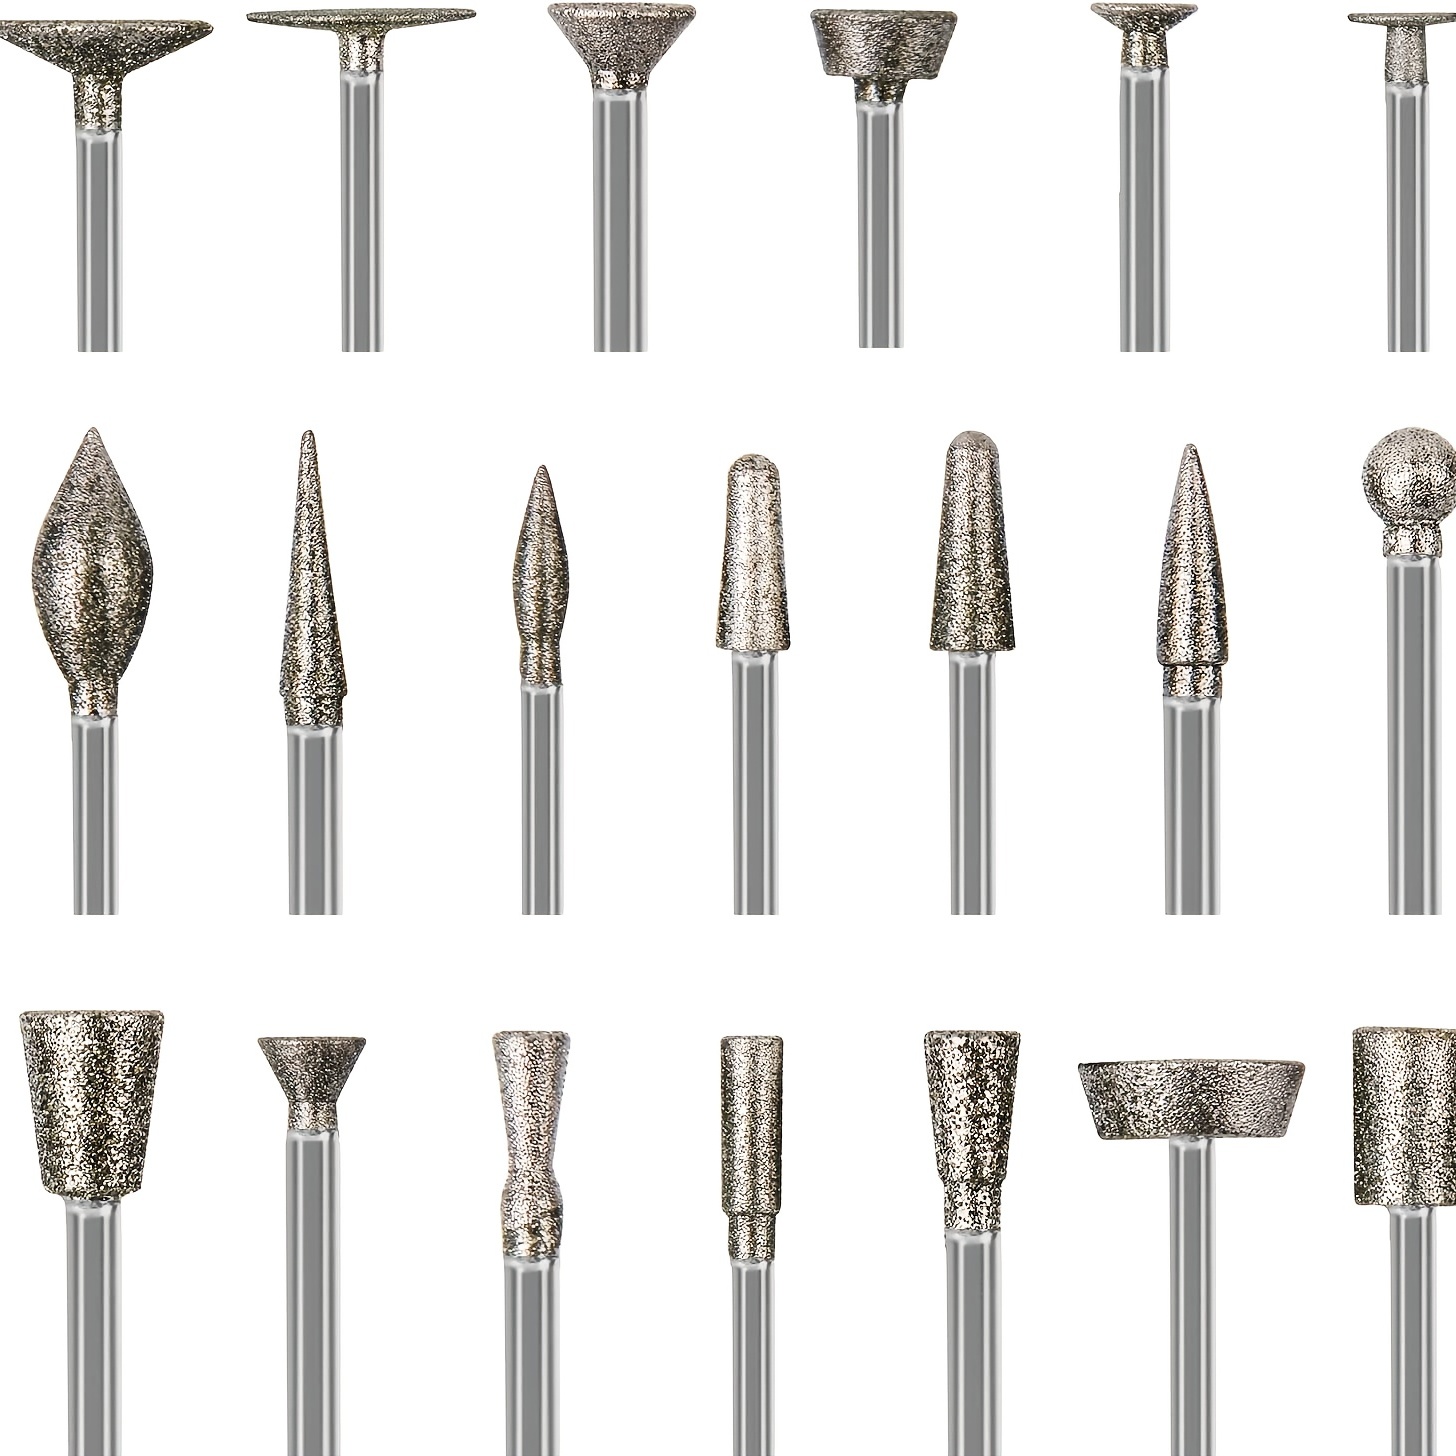 Rotary Burrs Drill Bits For Dremel Set 20 pcs Steel High Speed Wood Carving  Tool